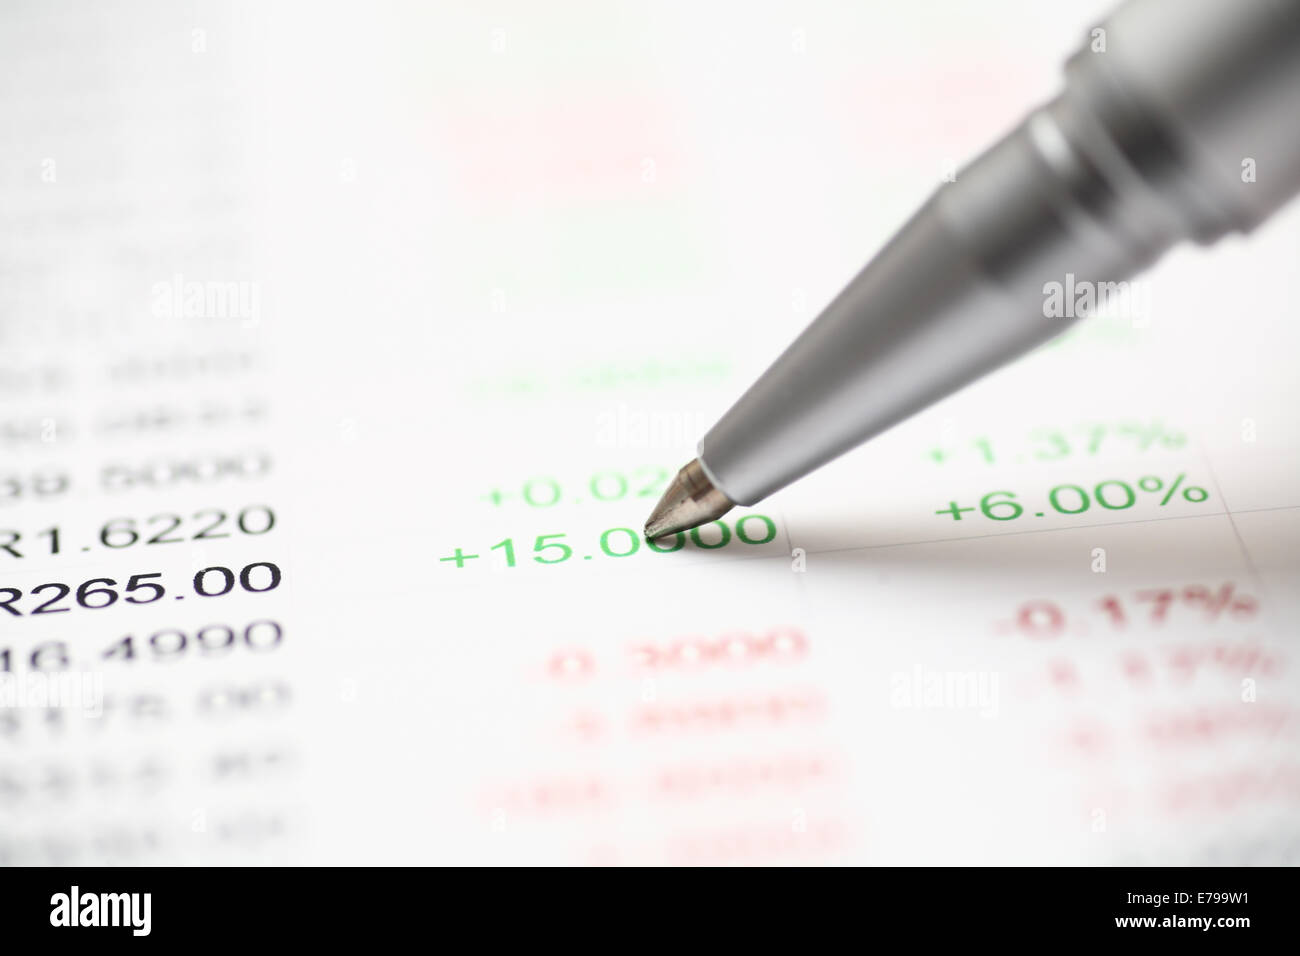 Analysis of financial statements. Focus on pen. Shallow depth of field. Close-up. Stock Photo